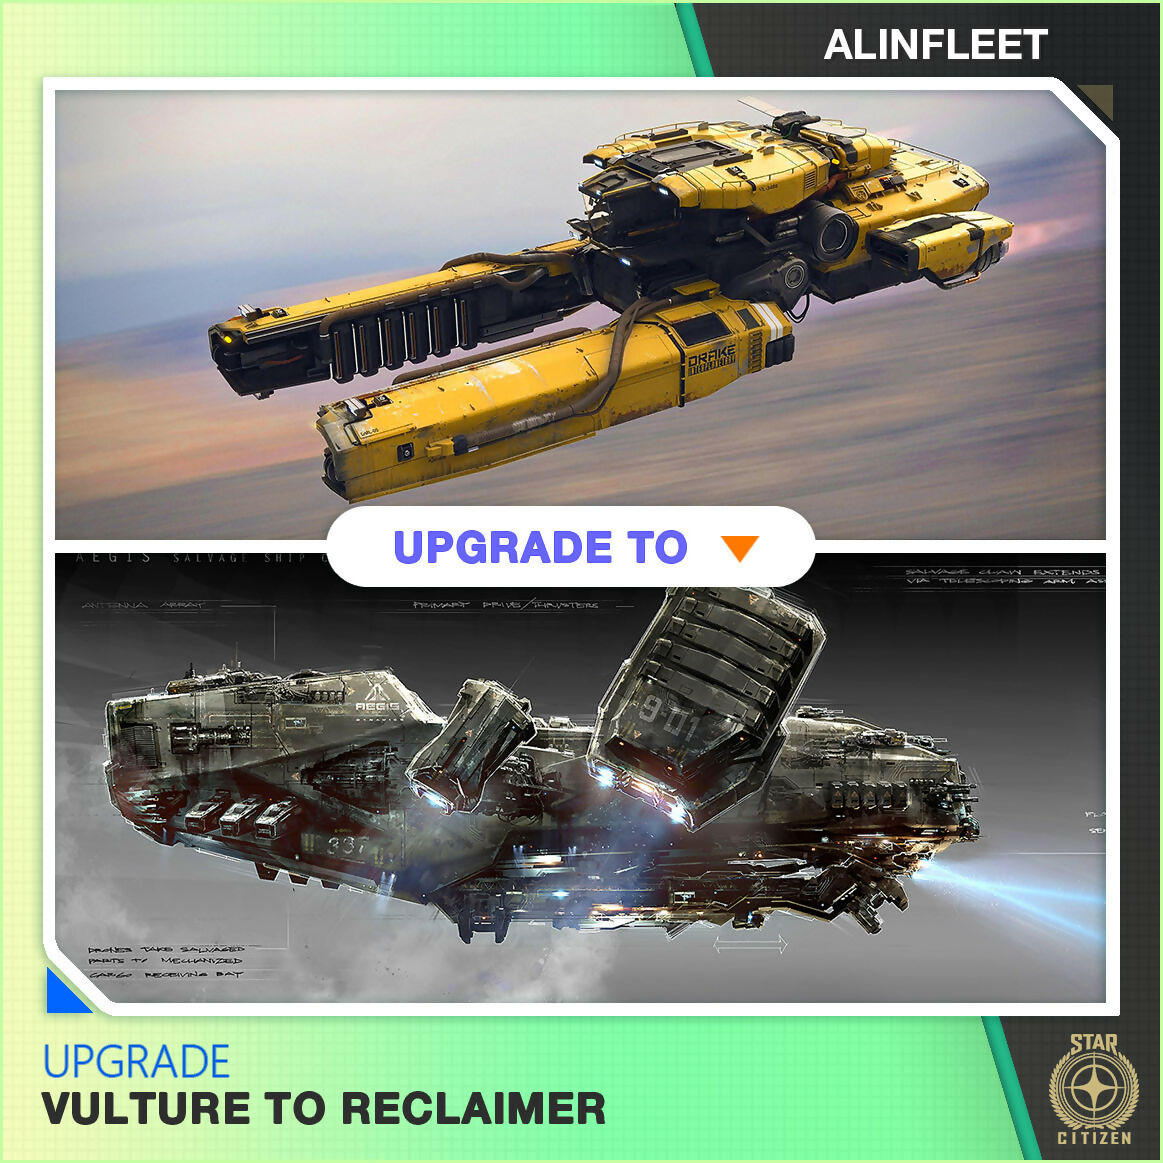 Upgrade - Vulture to Reclaimer